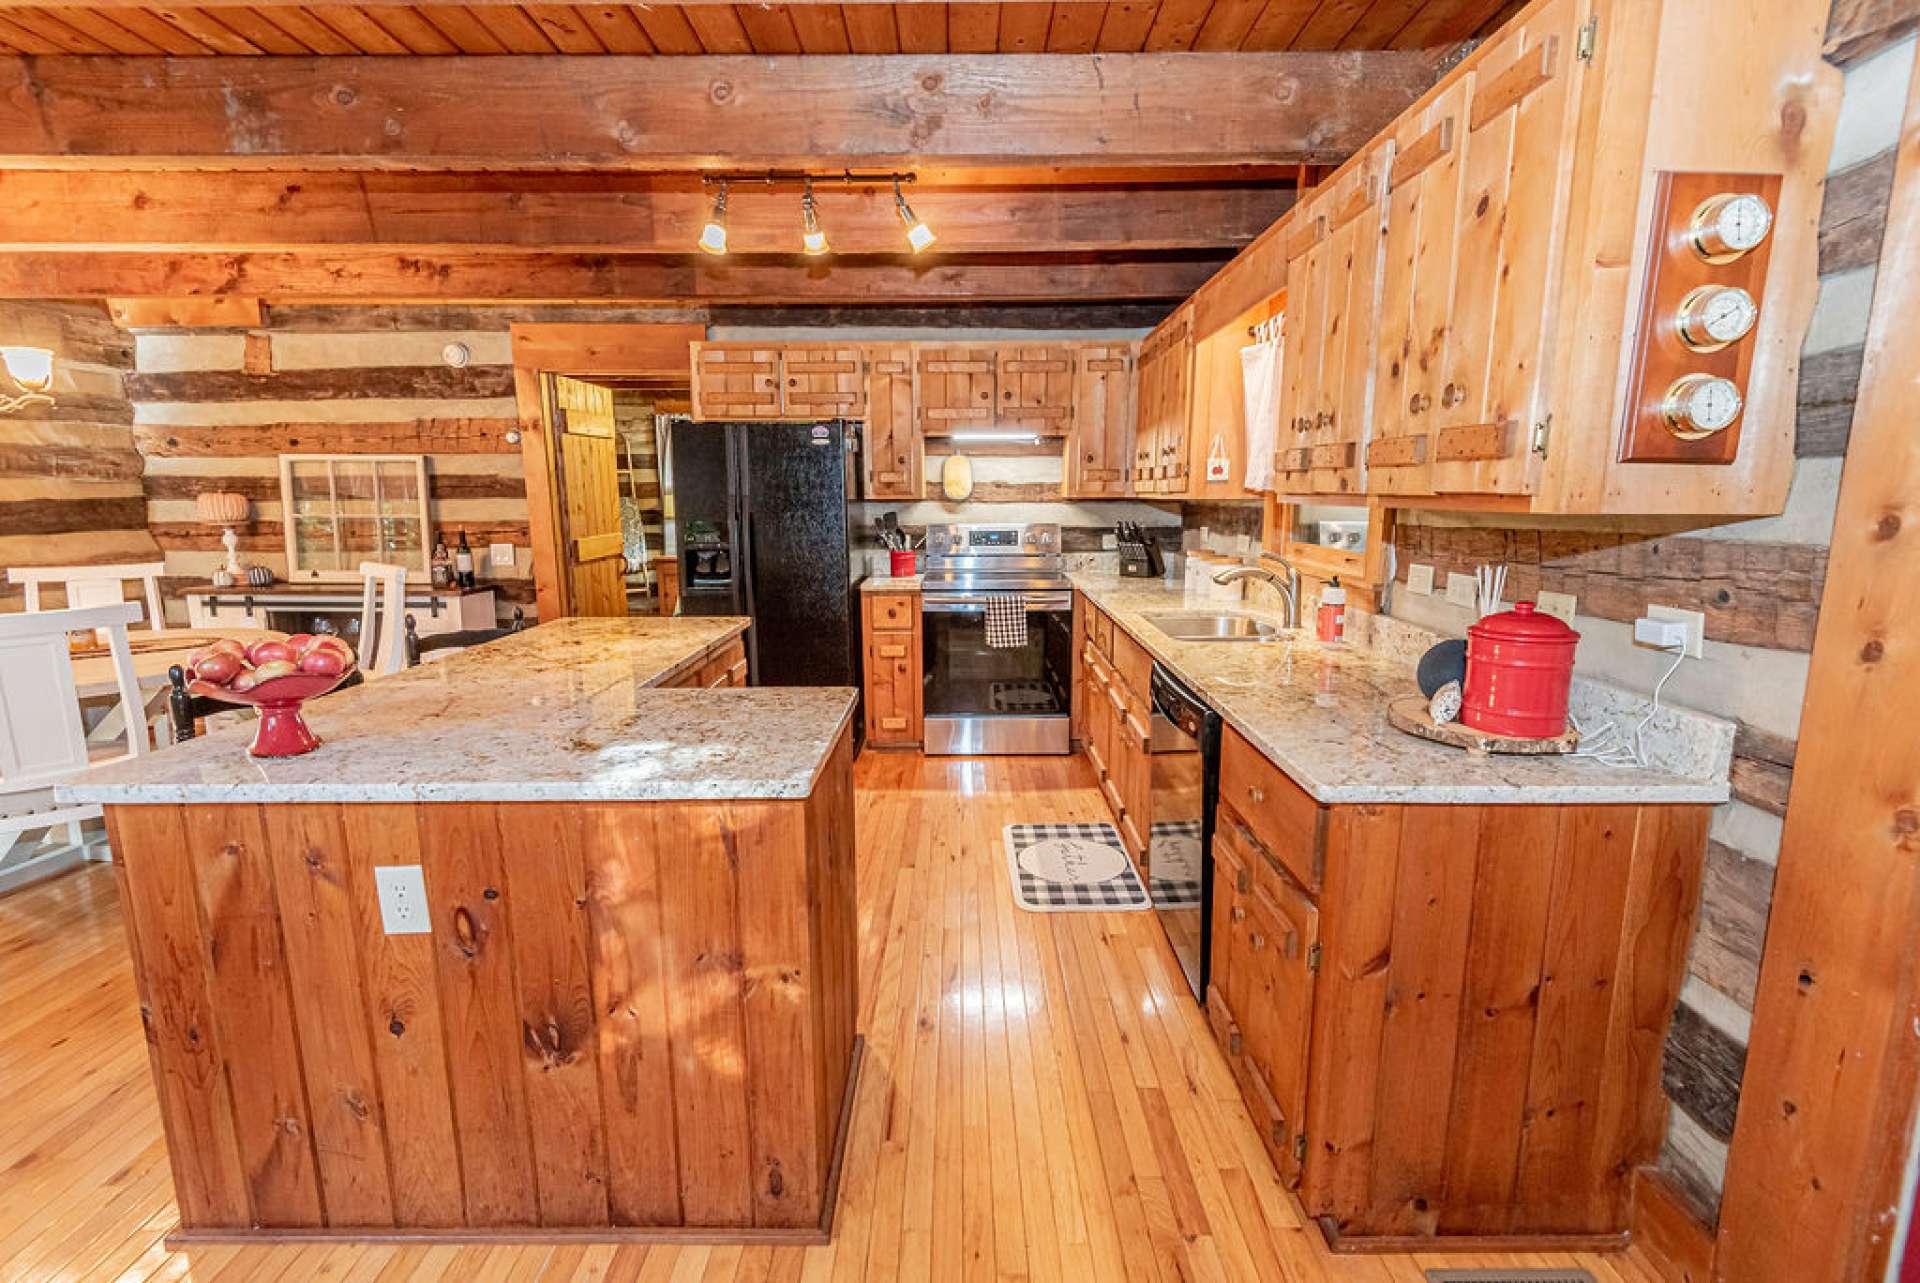 This kitchen has modern appliances, impressive granite countertops, and exposed beams to enhance the log cabin feel.